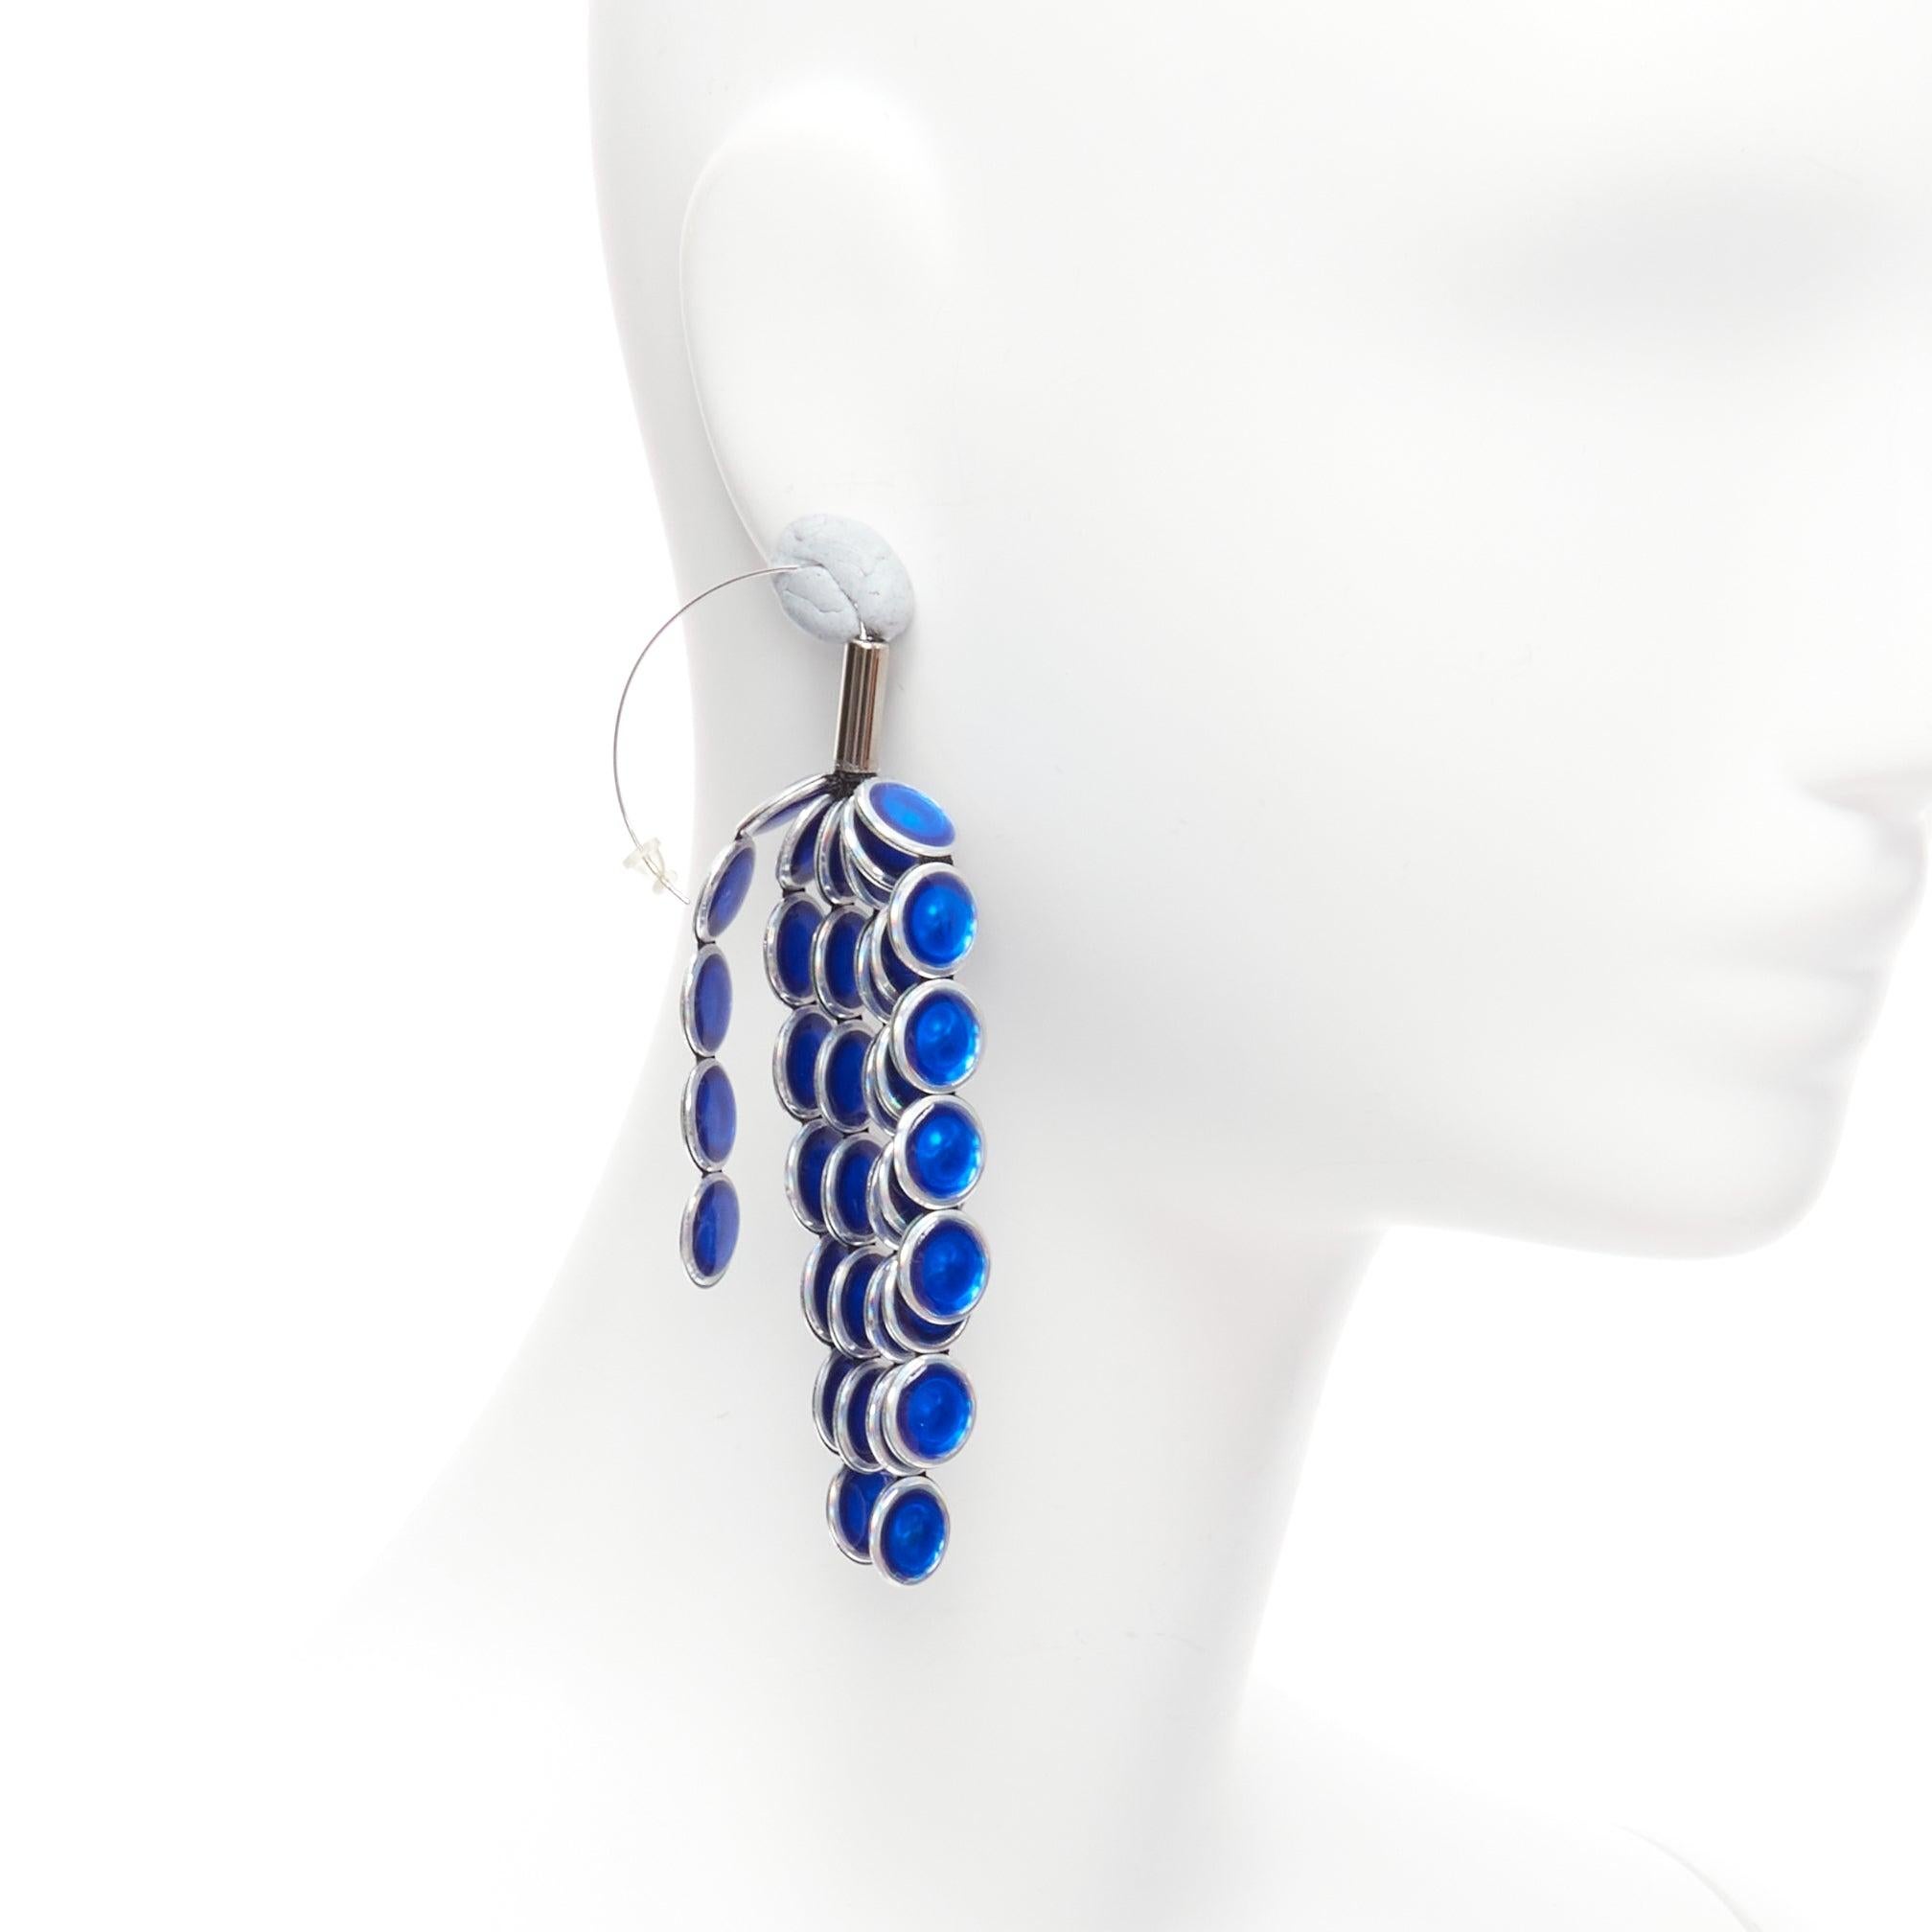 TOGA ARCHIVES blue rhinestone chandelier drop pierced earrings Pair
Reference: BSHW/A00086
Brand: Toga Archives
Material: Metal, Plastic
Color: Silver, Blue
Pattern: Solid
Closure: Loop Through
Lining: Silver Metal

CONDITION:
Condition: Very good,